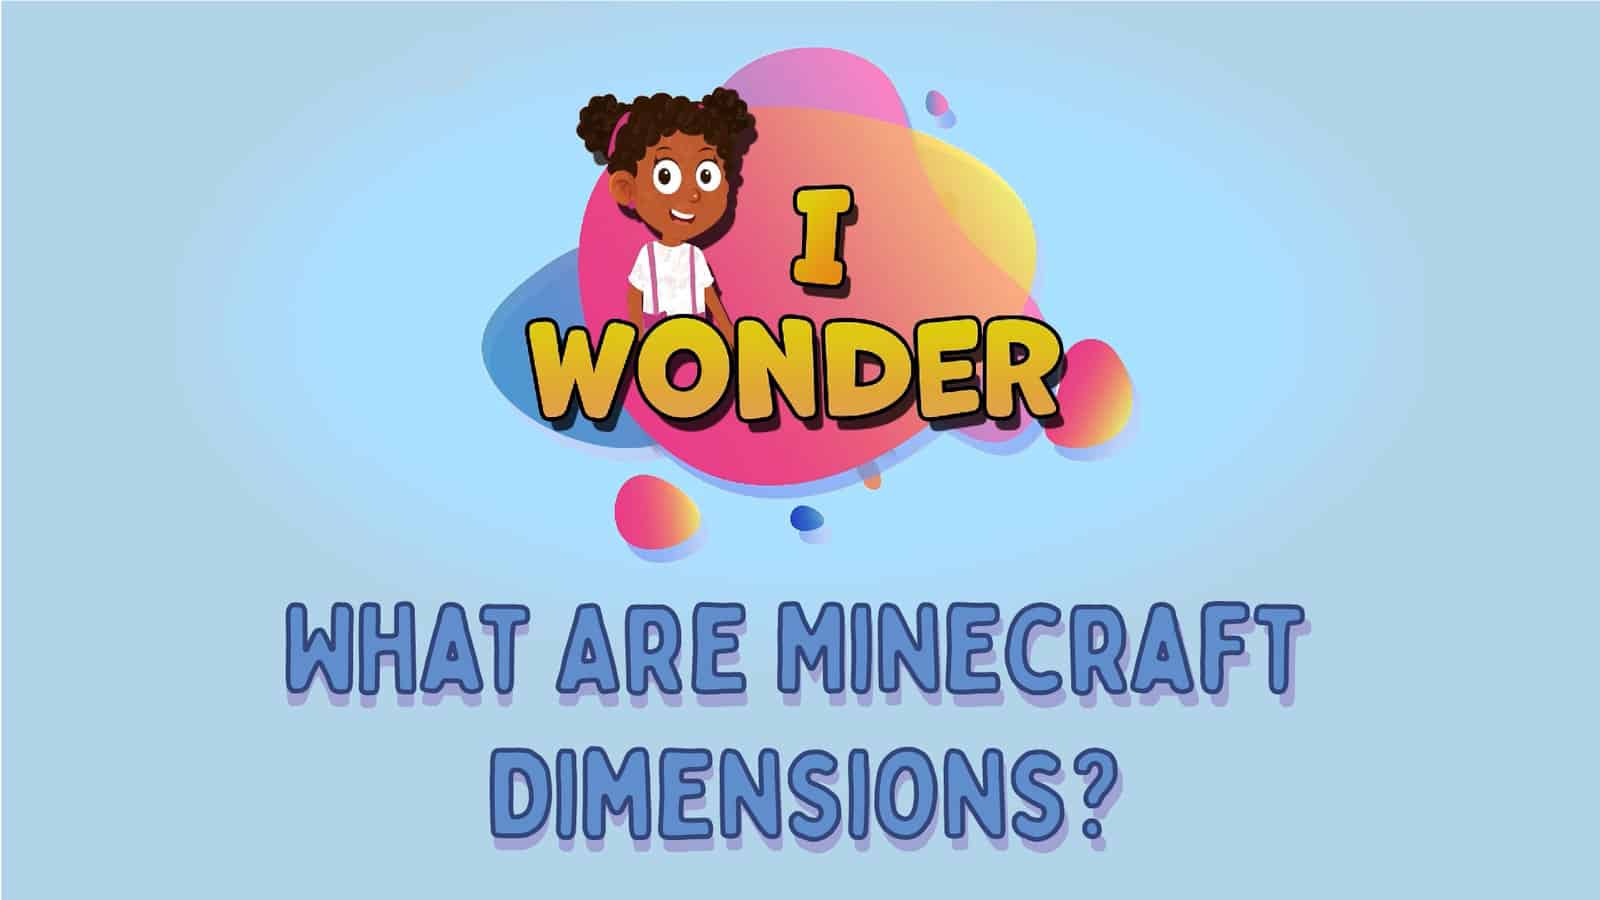 What Are Minecraft Dimensions?